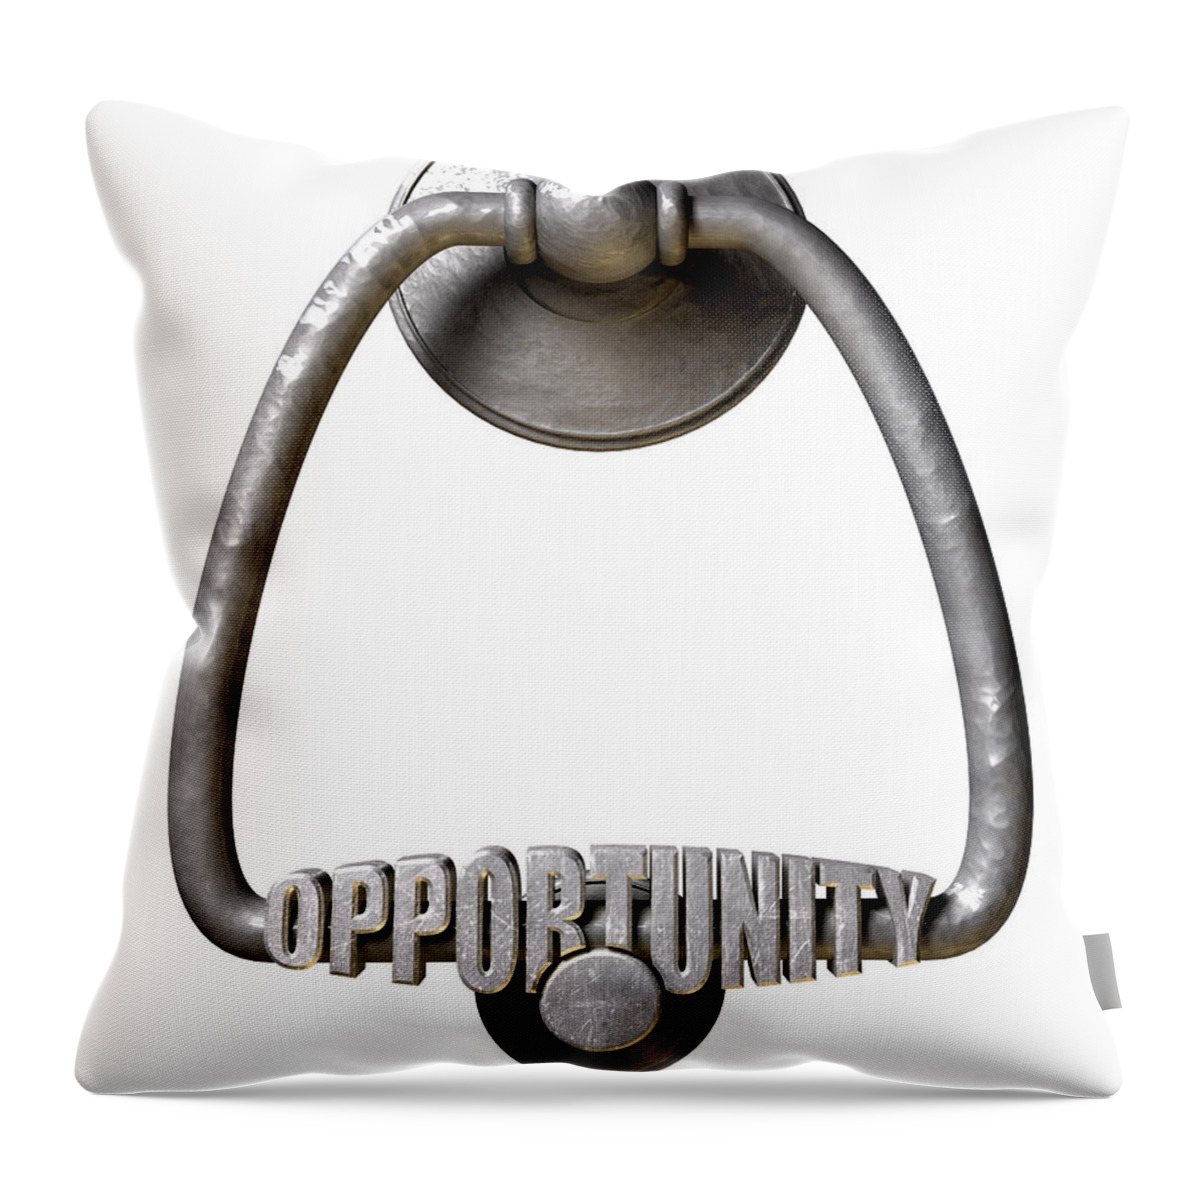 Opportunity Knocks Throw Pillow featuring the digital art Opportunity Knocks Door Knocker by Allan Swart